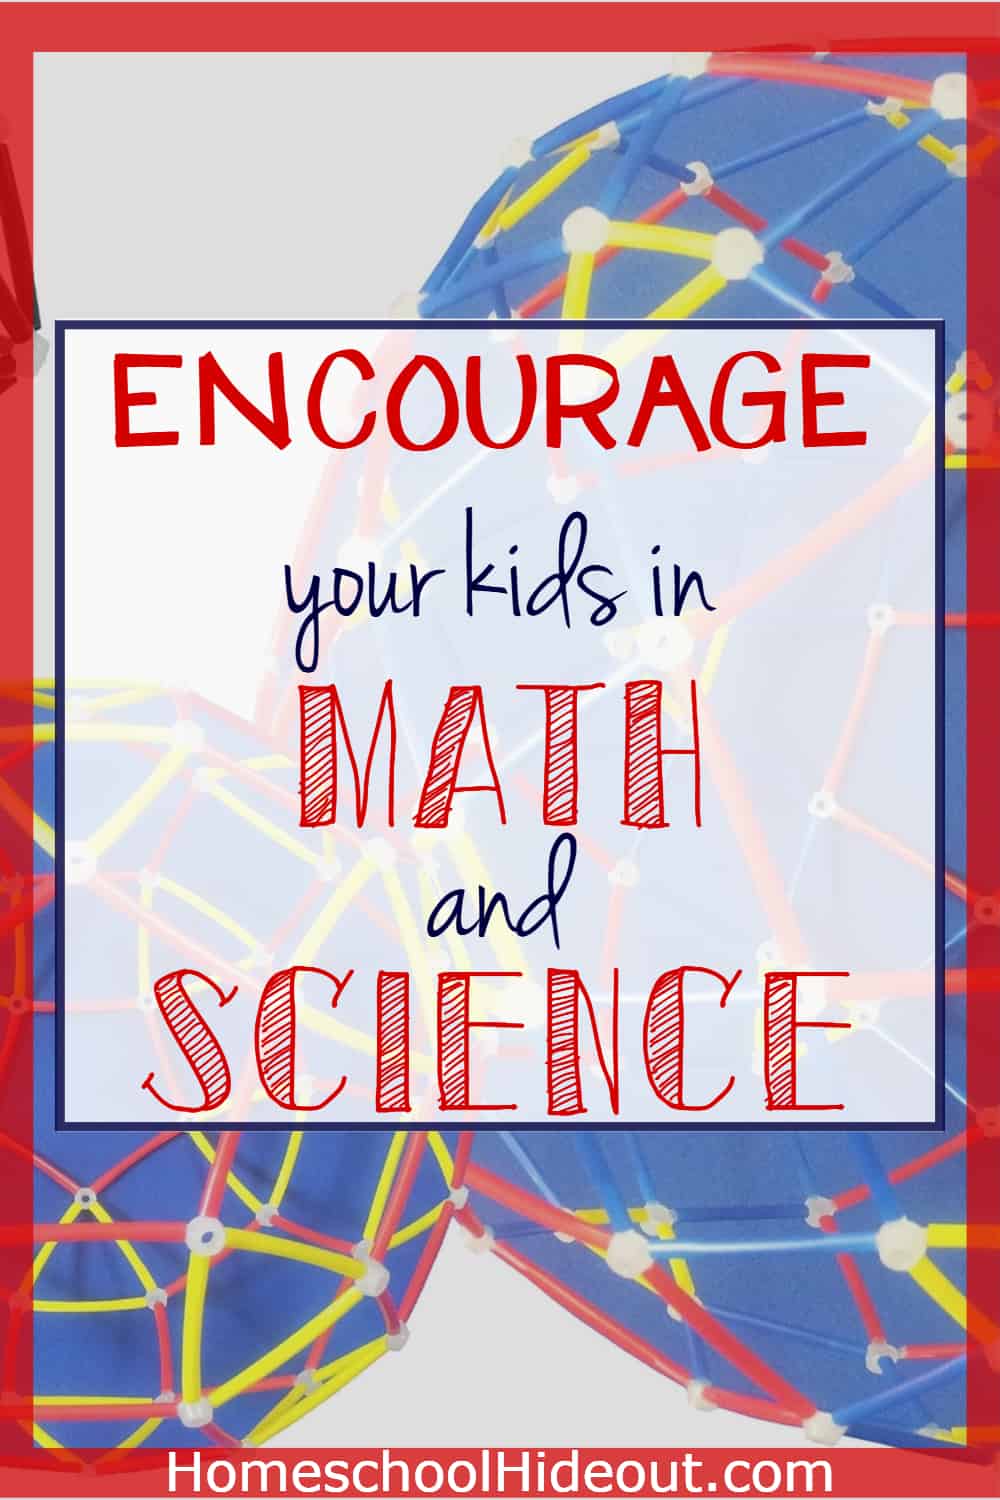 Math and science are just as important as reading. I love these ideas for encouraging our kids to master these skills. #math #science #homeschool #stem